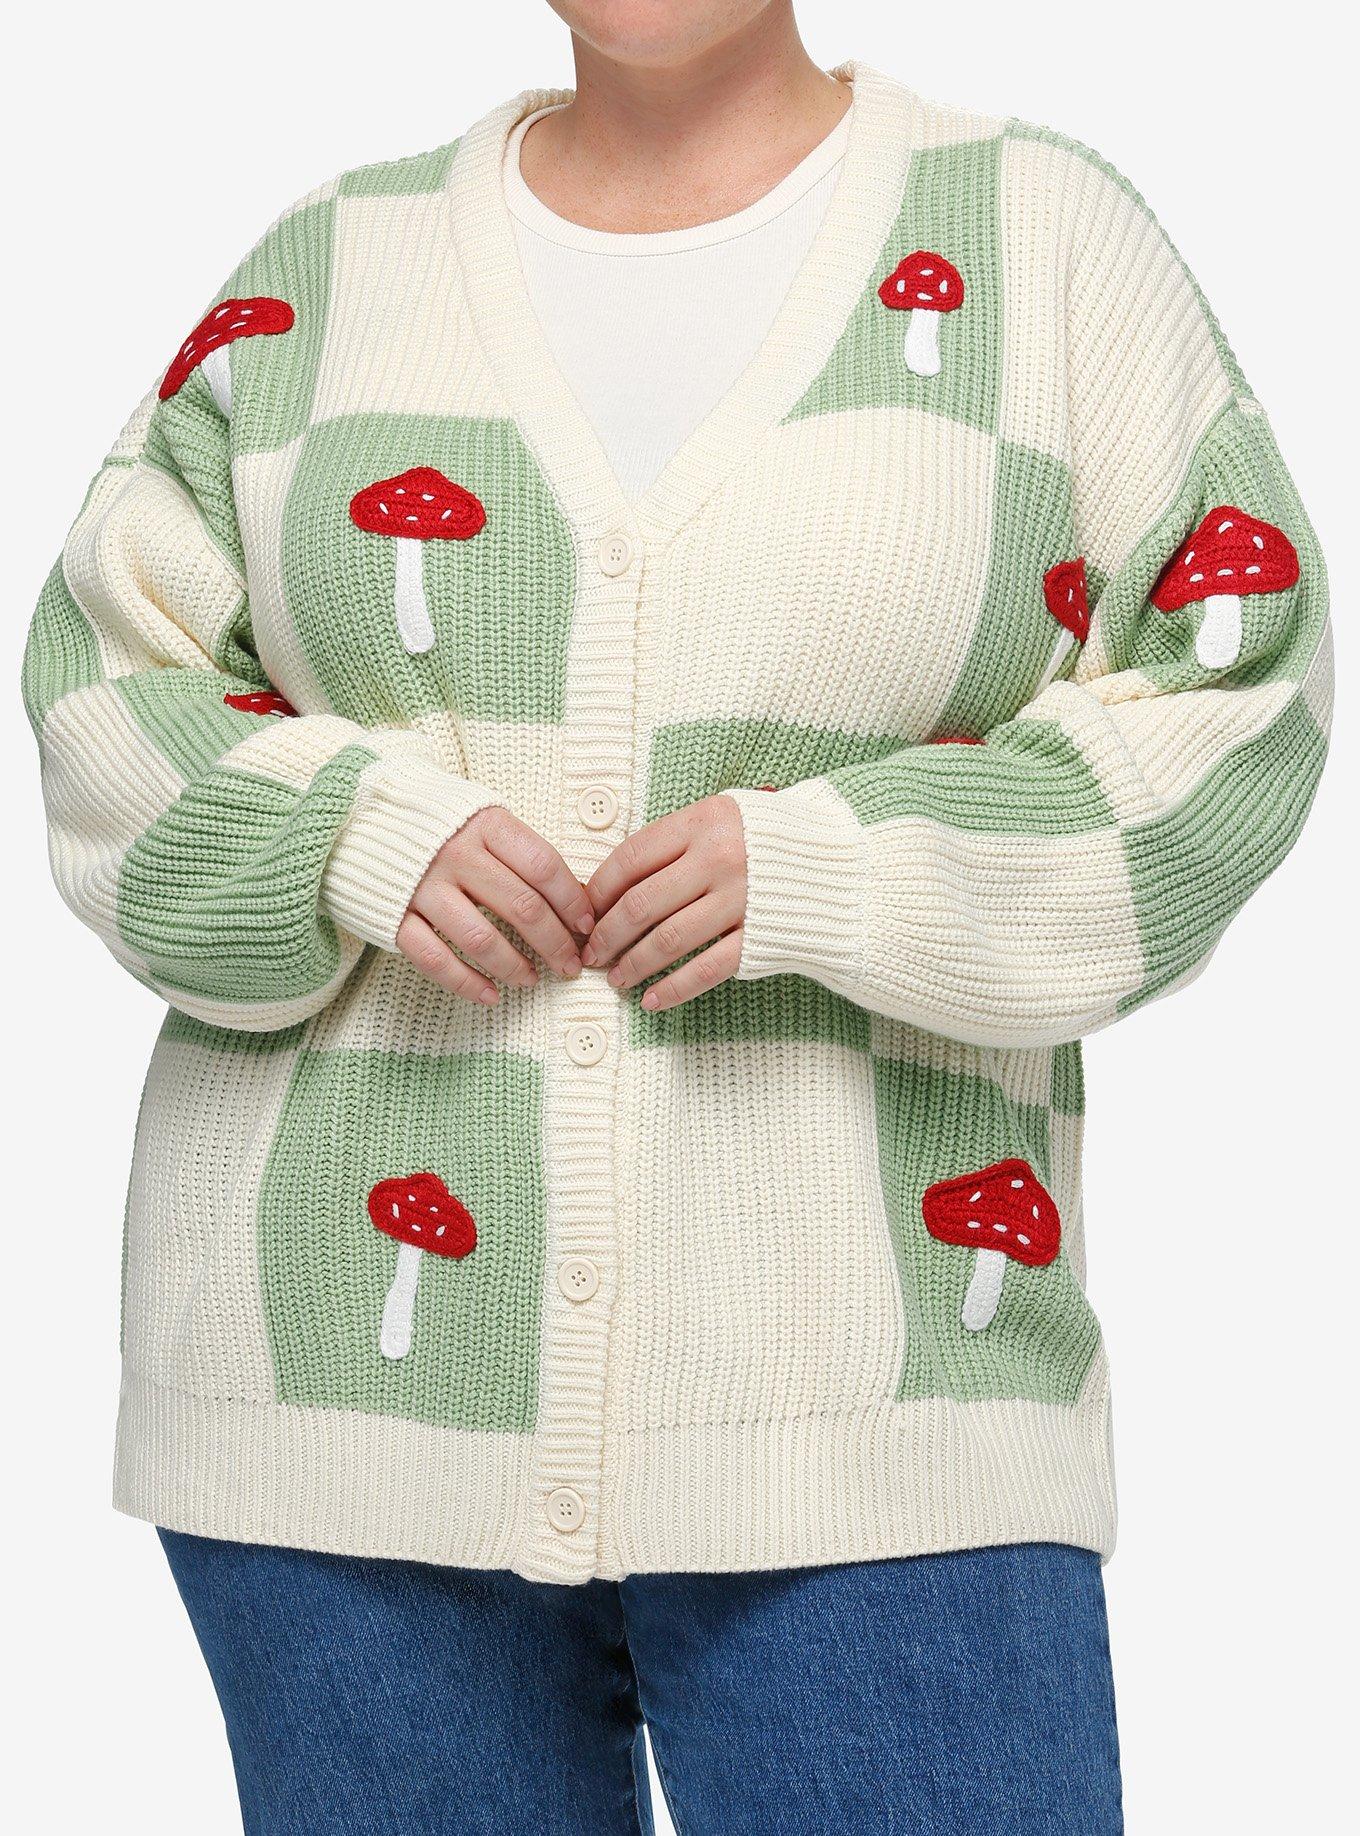 Harajuku love Red pattern knitted buttoned Cardigan sweater punk